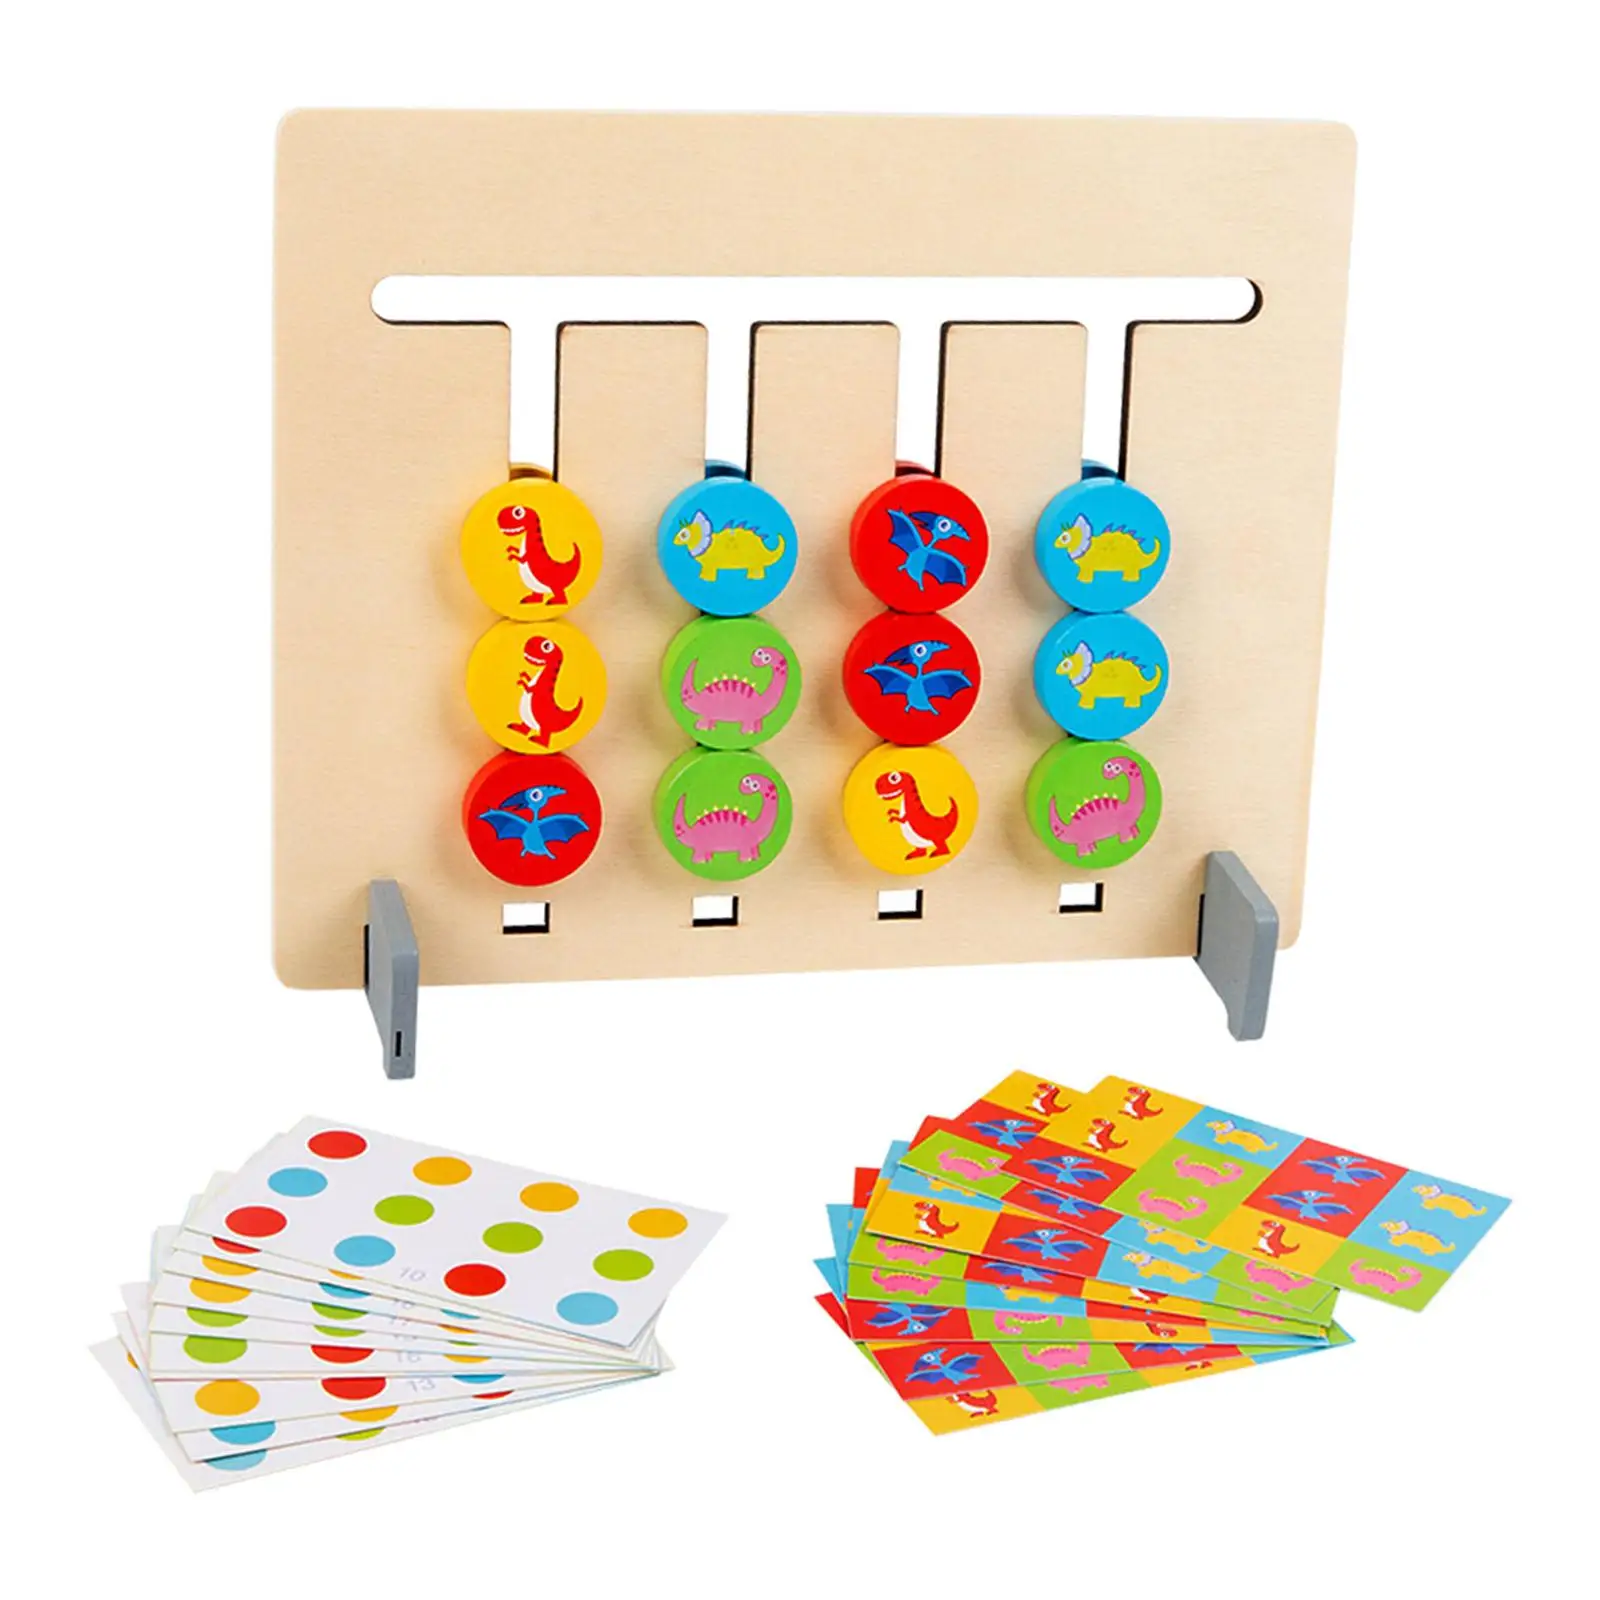 Montessori Slide Puzzle Toy Game Preschool Learning Activities Brain Teaser Jigsaw Shape Color Matching Game for Preschool Kids